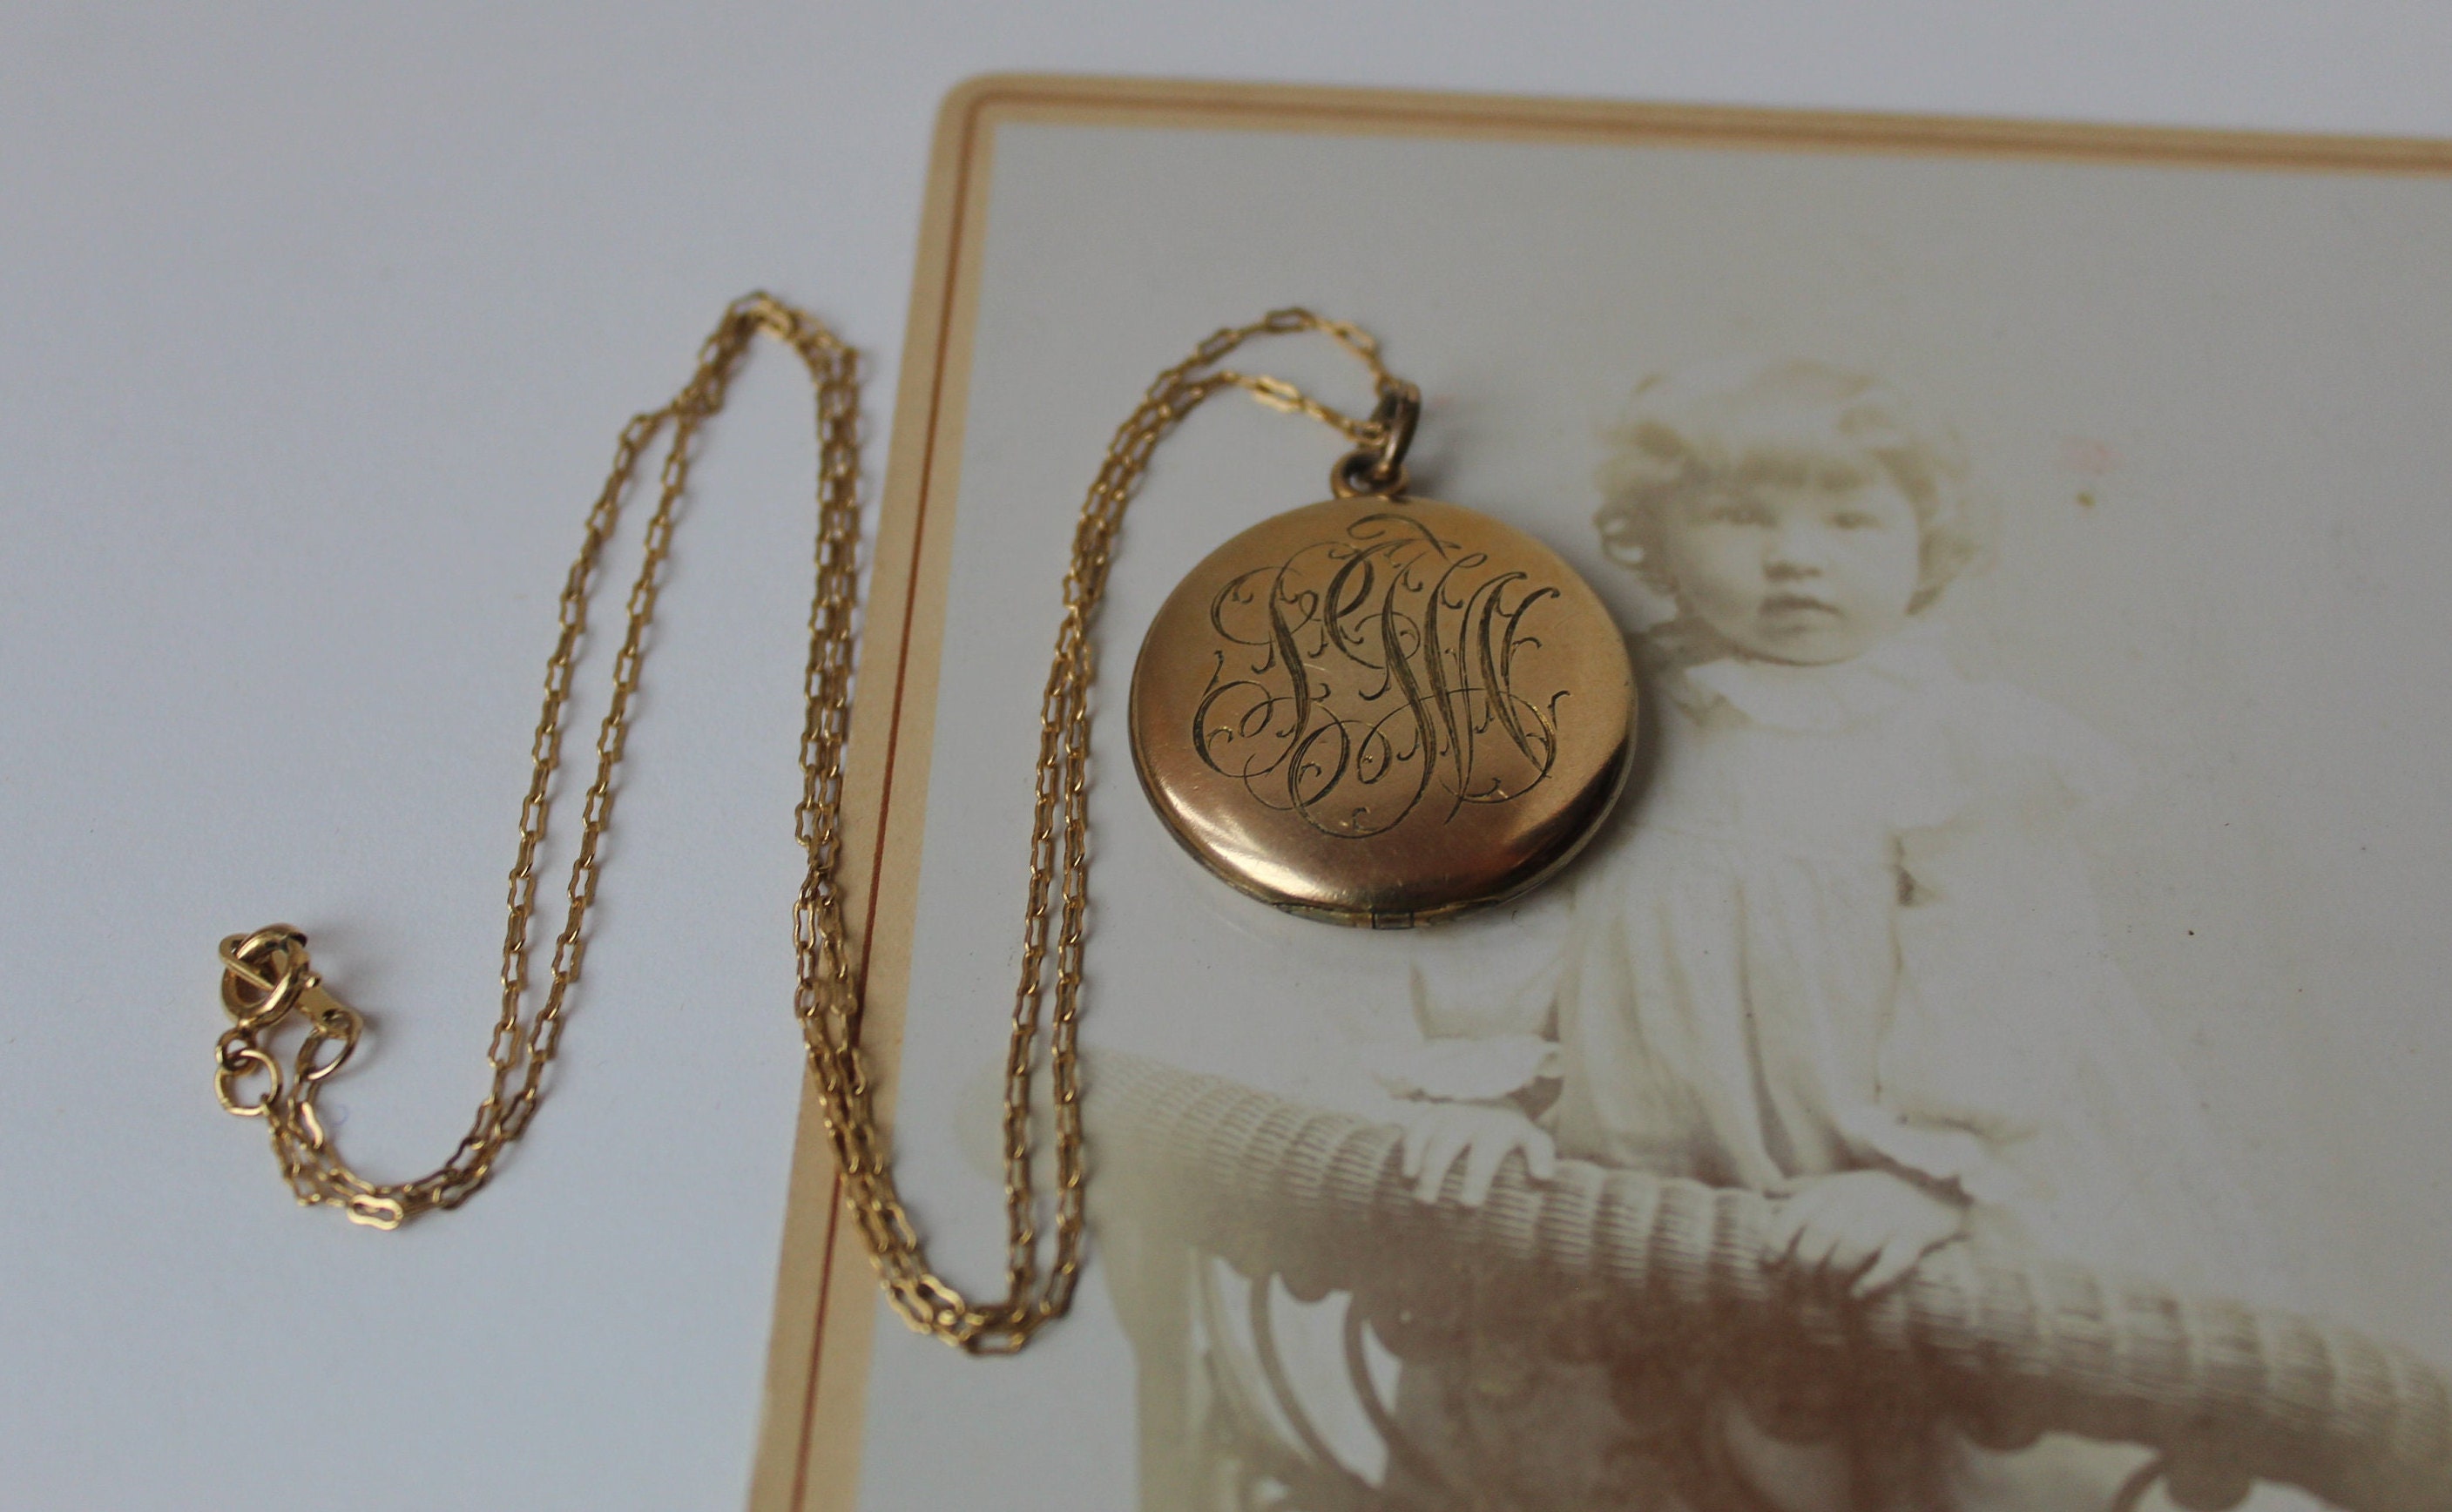 Sale - Antique Monogrammed Locket - Edwardian Era Gold Filled Engraved FSL Letters Necklace - Circa 1910s Photograph Keepsake Fob Jewelry No Chain